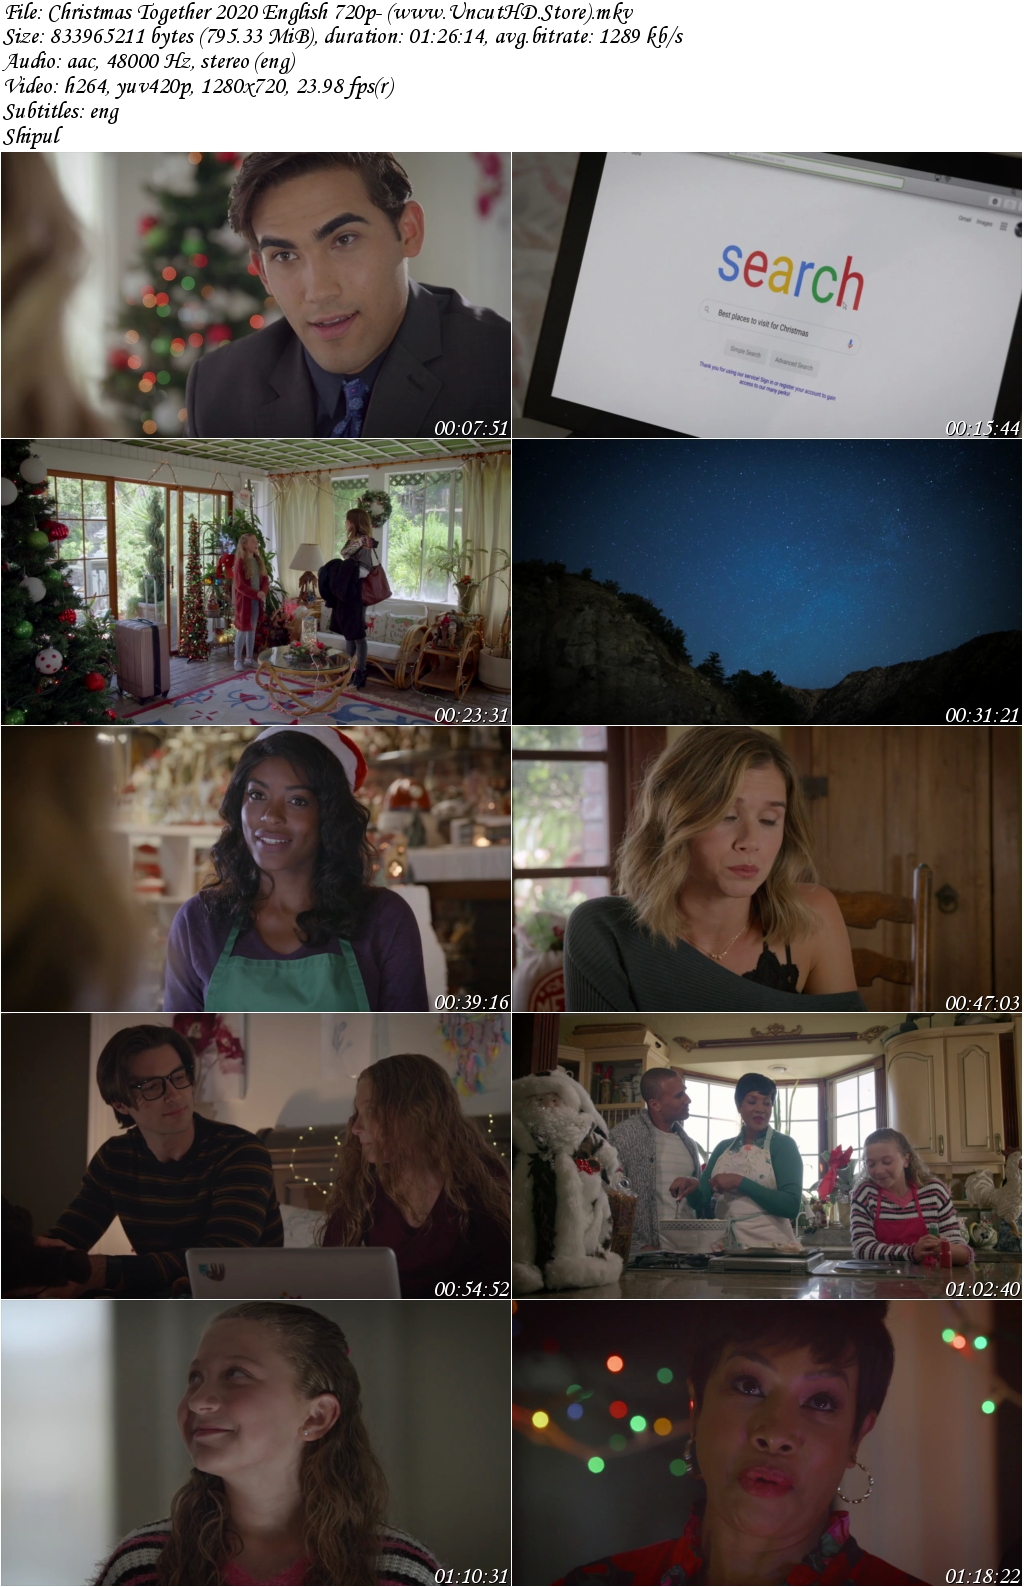 Christmas20Together20202020English20720p 20www.UncutHD.Store